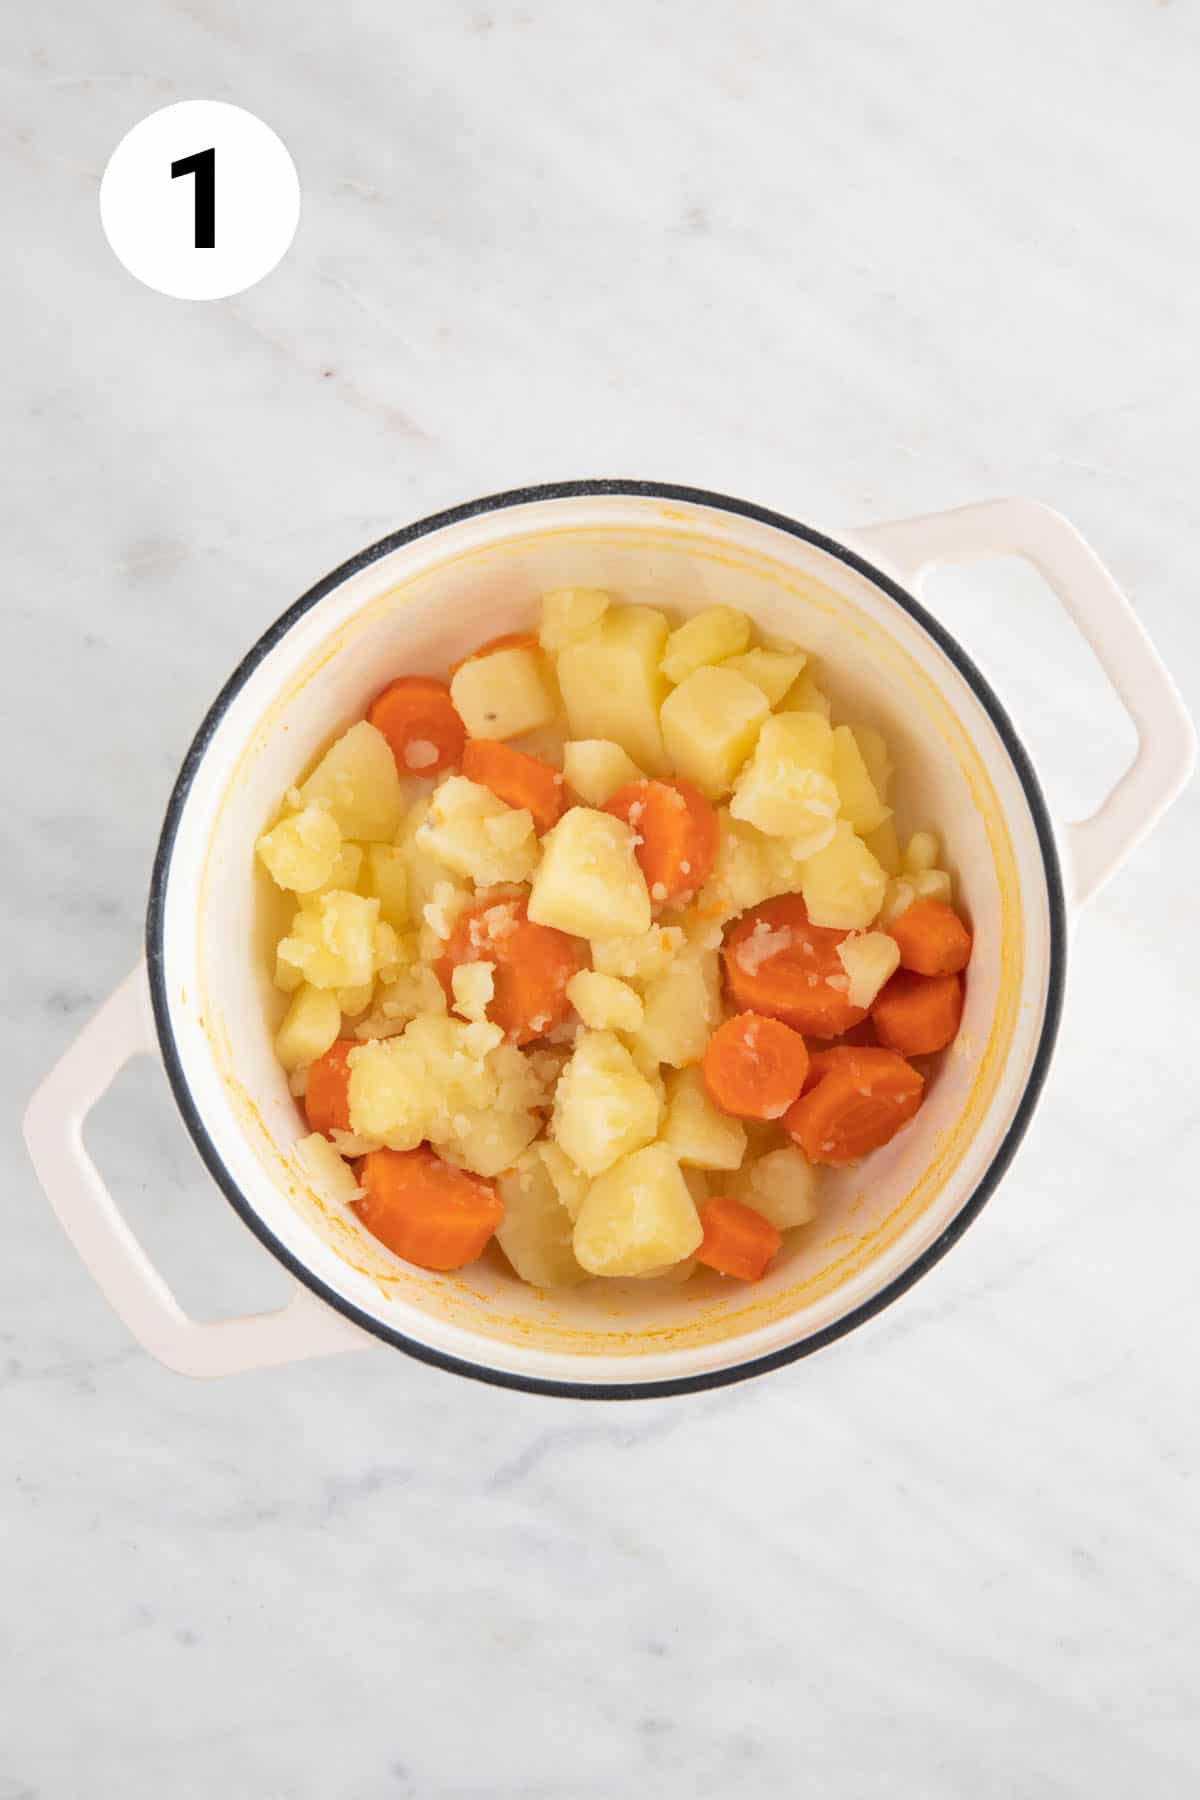 Boiled potatoes and carrots in a pot.